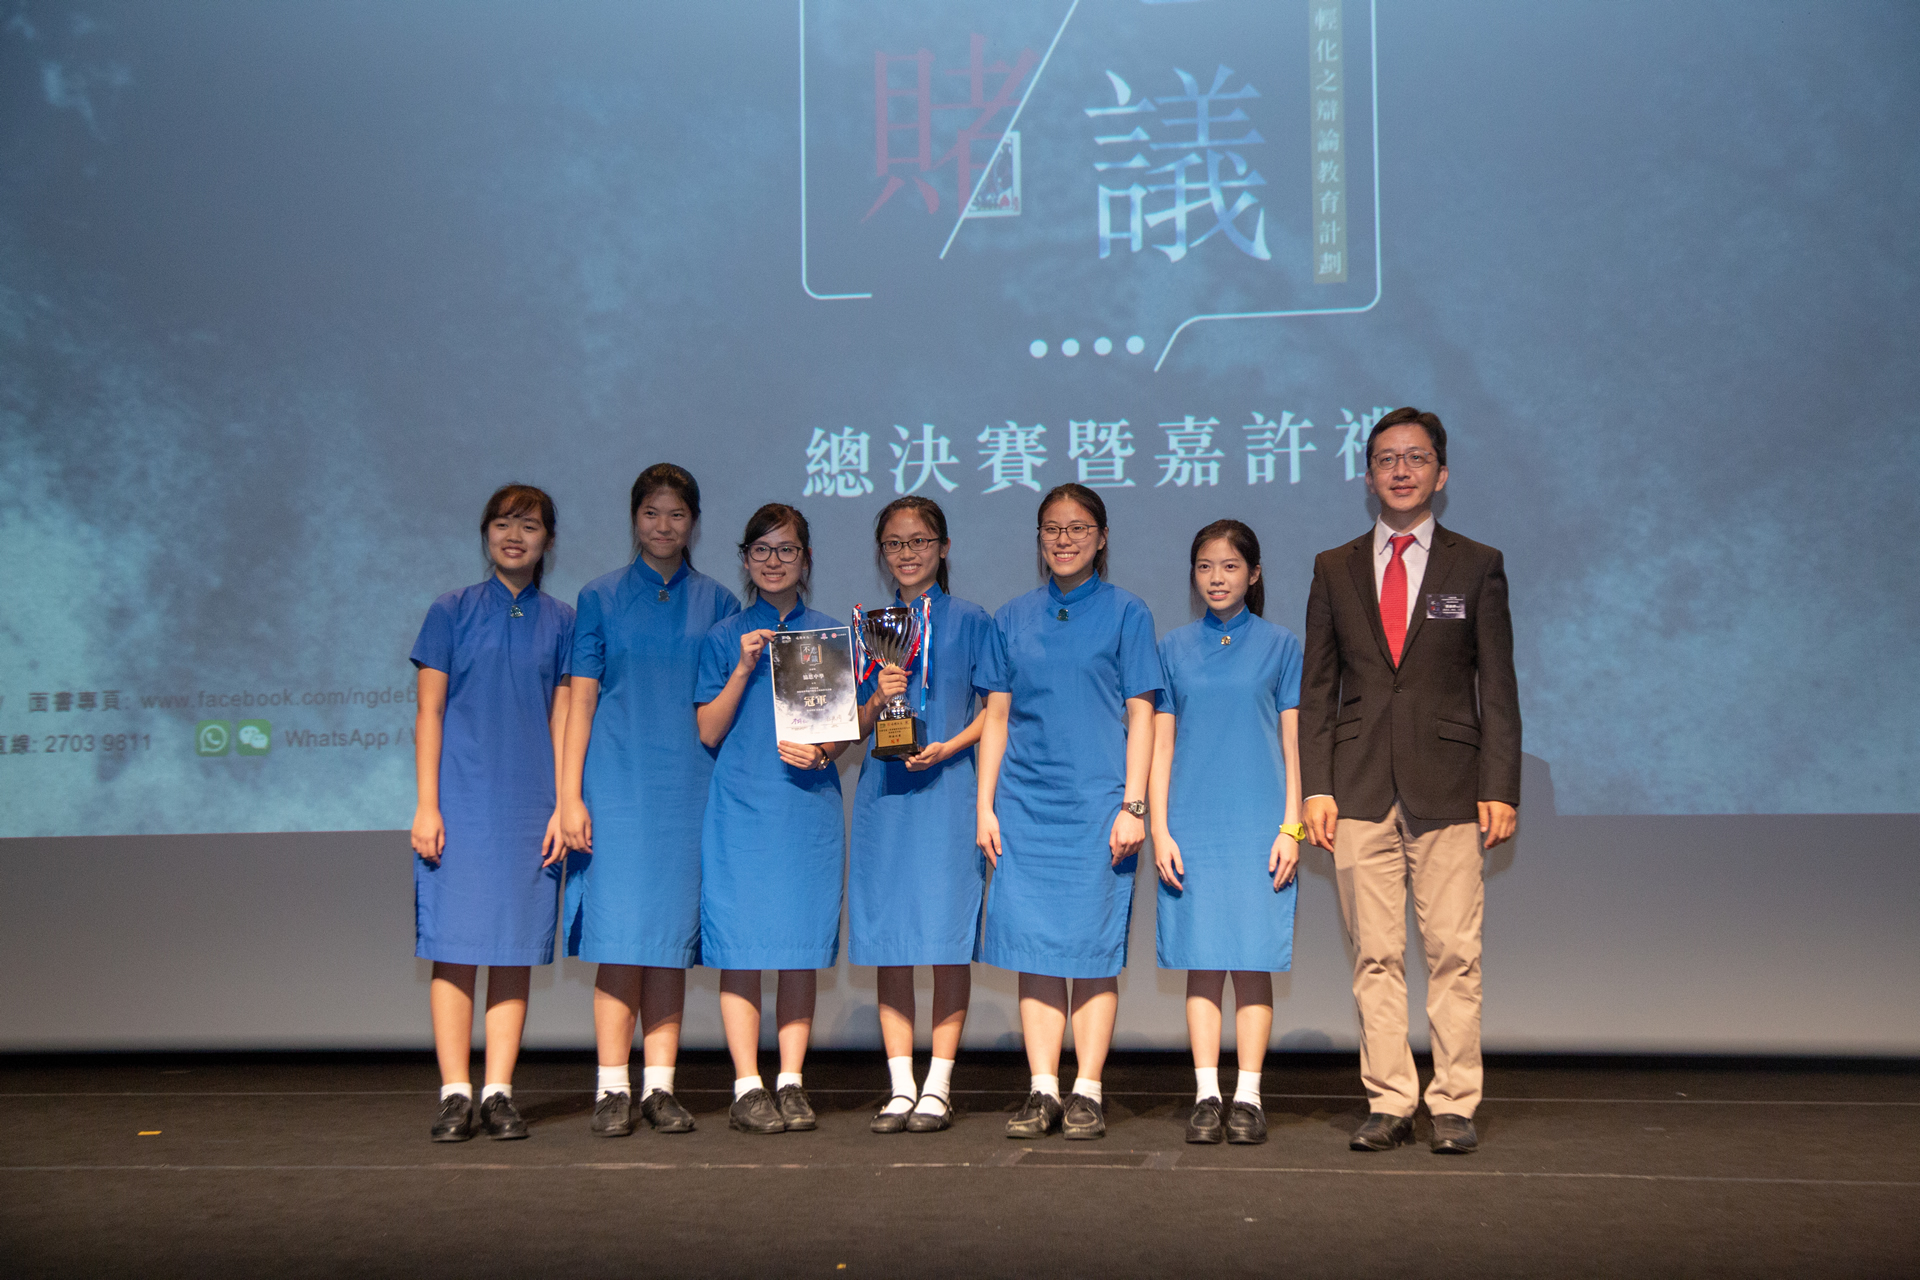 Mr. Yip Chun-to, Adrian, Chairman of the Ping Wo Fund Advisory Committee presented the prizes to the champion - Heep Yunn School and its debater (the fourth on the left) who won the Most Valuable Debater.